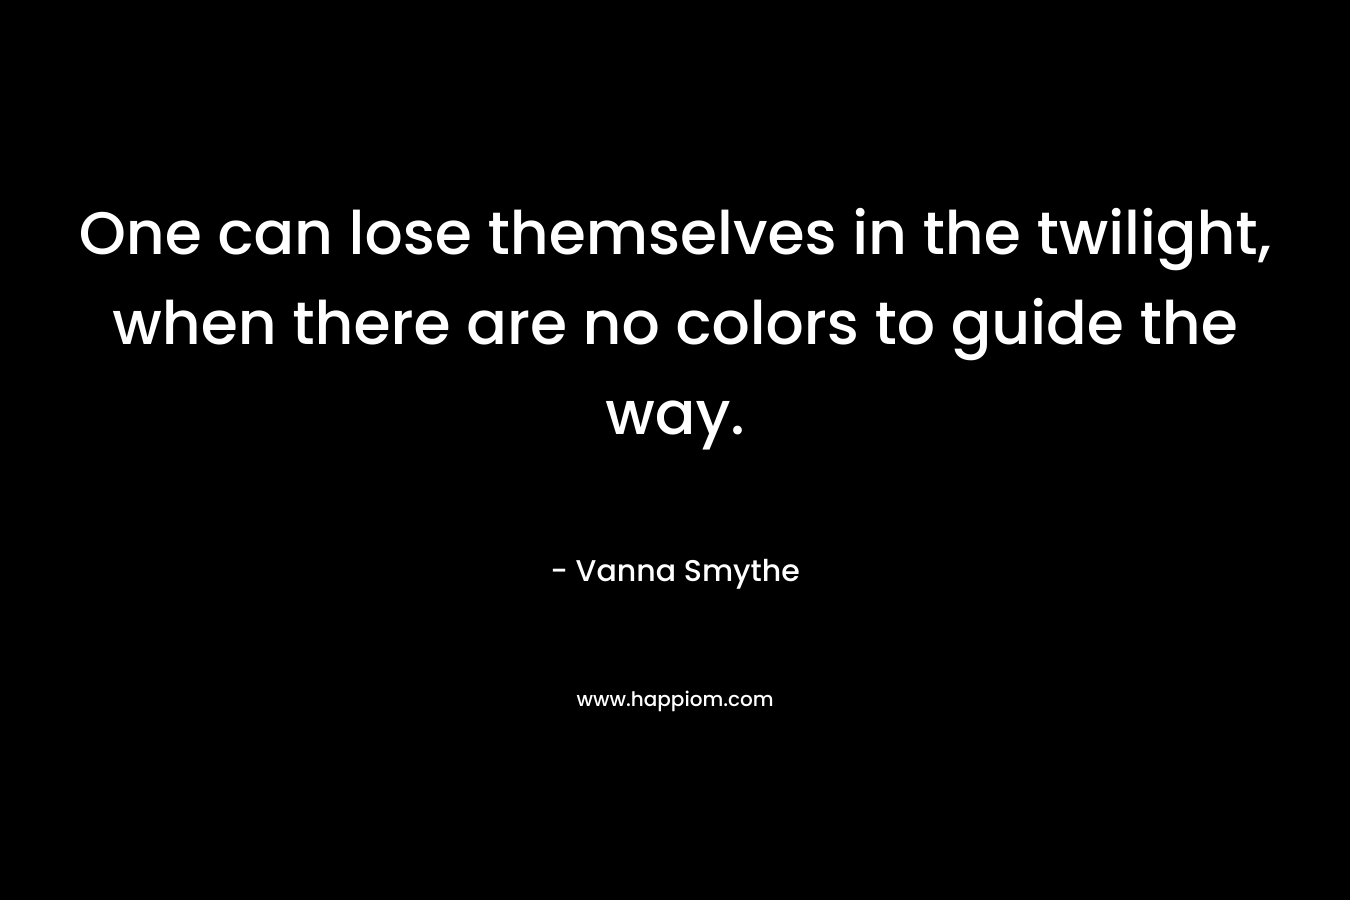 One can lose themselves in the twilight, when there are no colors to guide the way. – Vanna Smythe